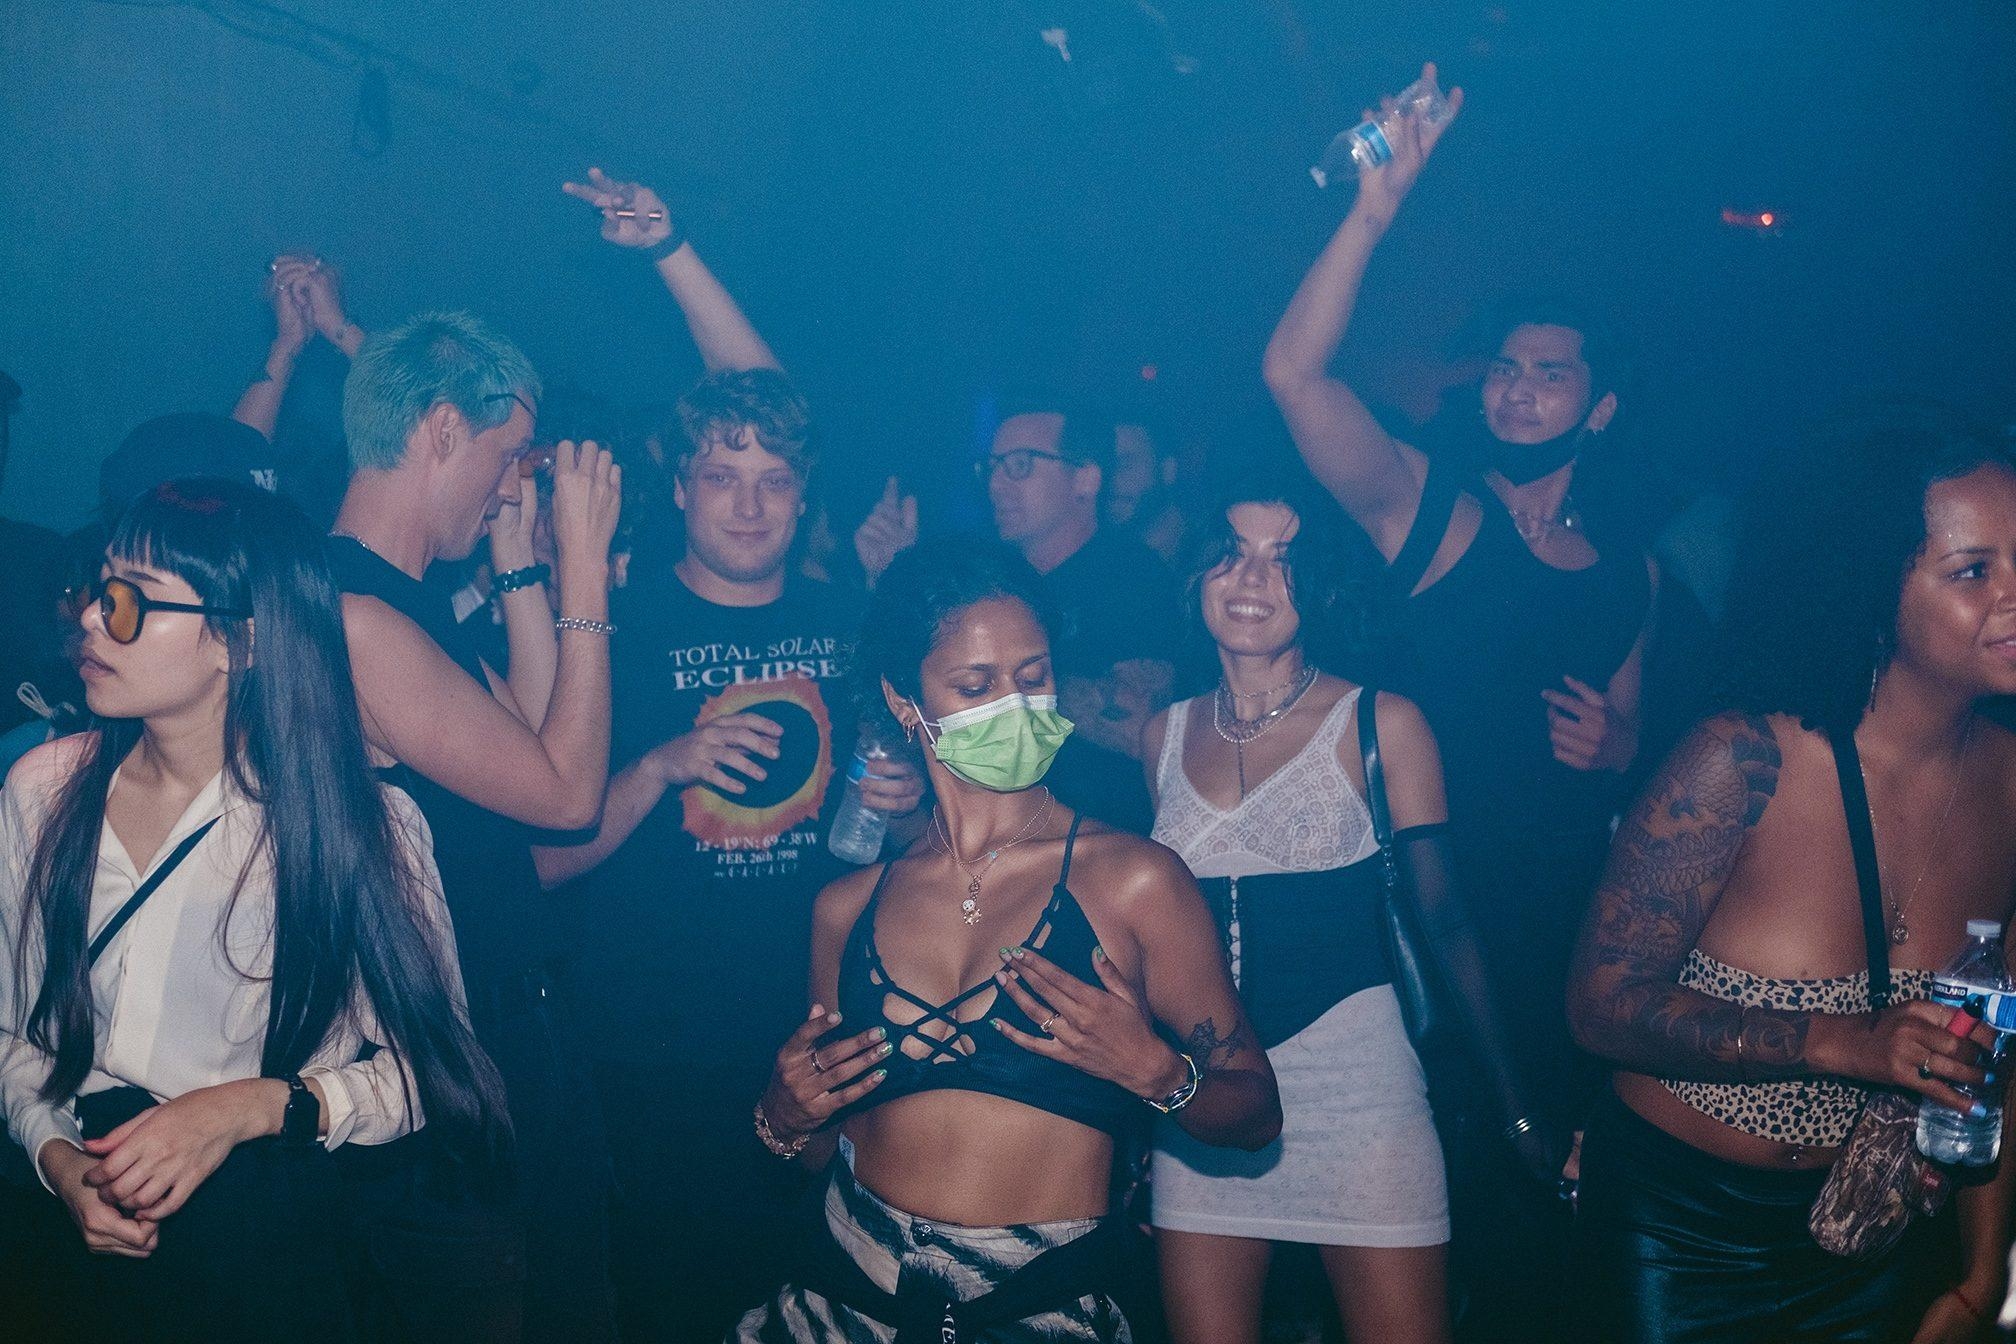 Wild Wild West After the pandemic, LAs rave underground bounces back stronger than ever - Features pic